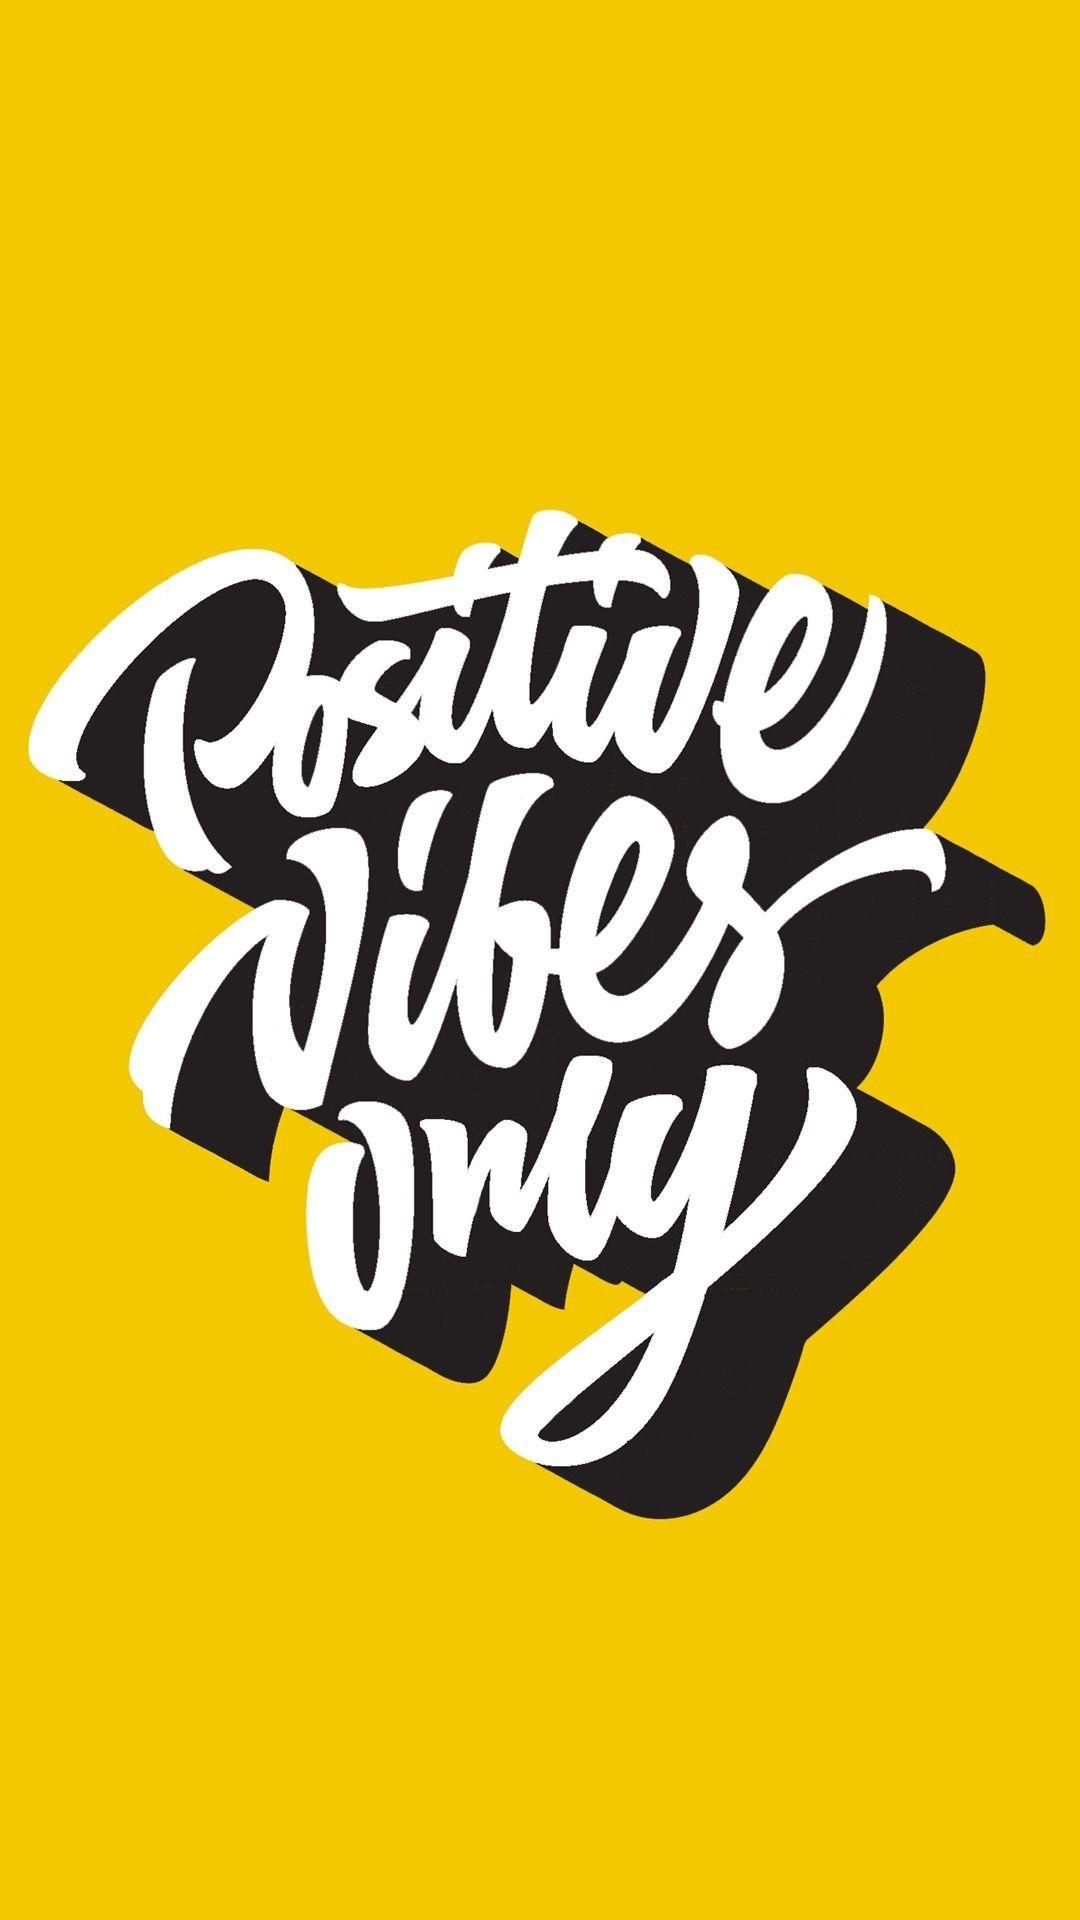 Download Exuding Positivity: Good Vibes Only Wallpaper